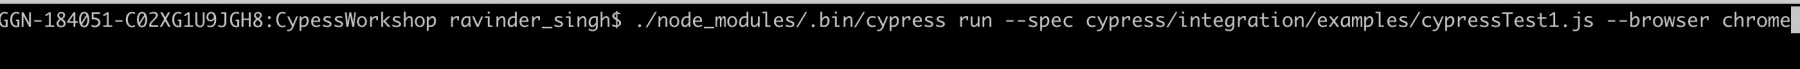 Running Cypress in Chrome from CLI